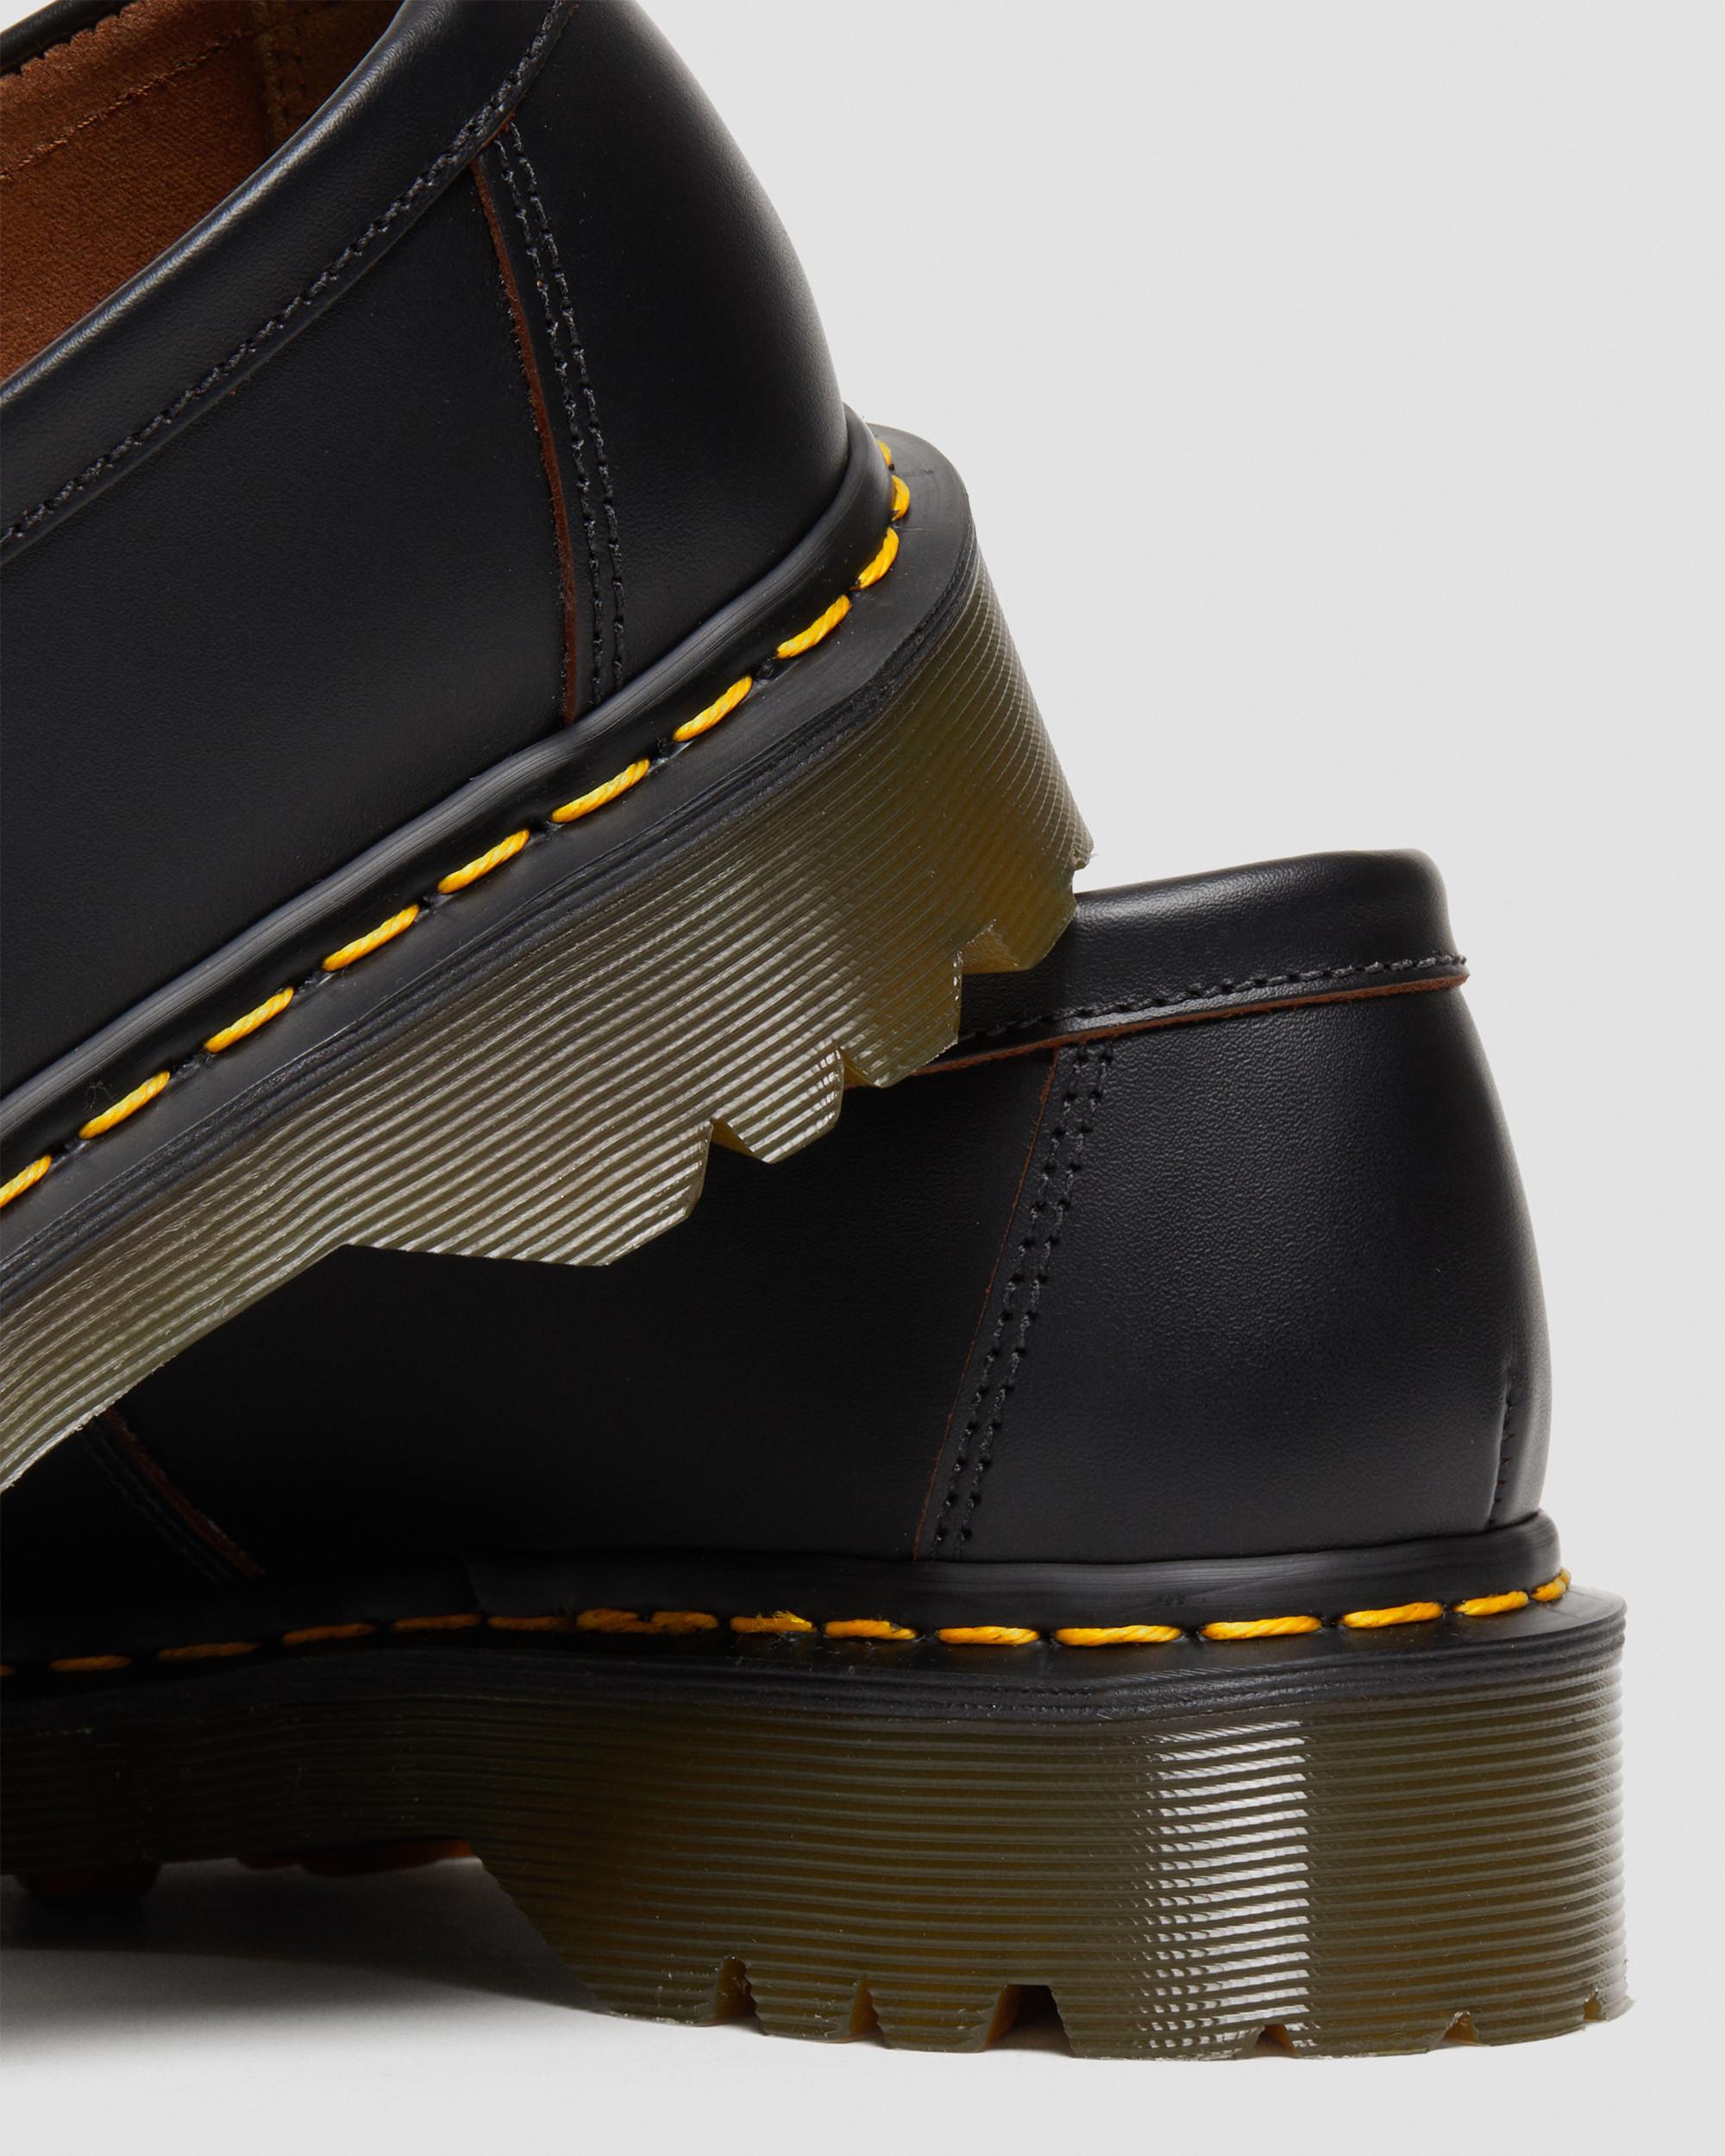 Penton Bex Made in England Quilon Leather Loafers, Black | Dr. Martens